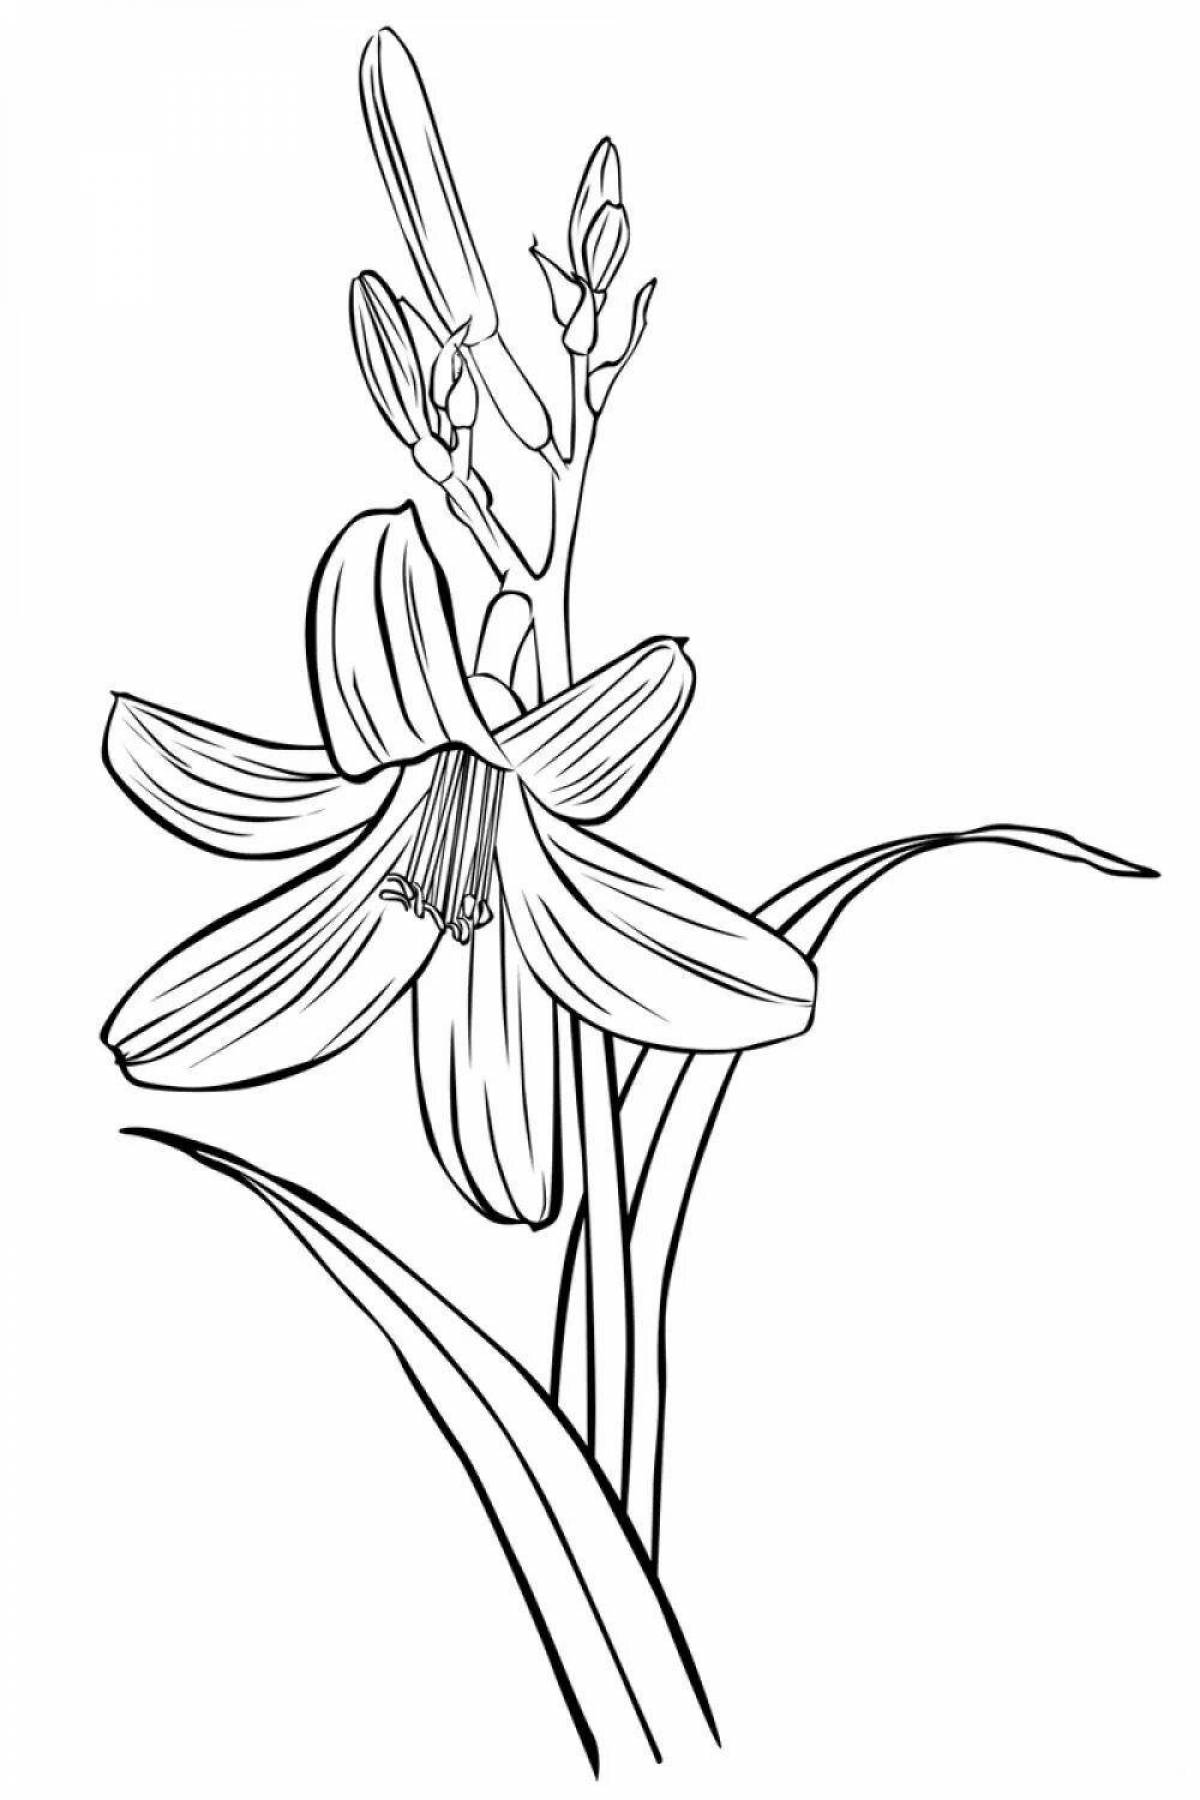 Coloring book bright lily flower